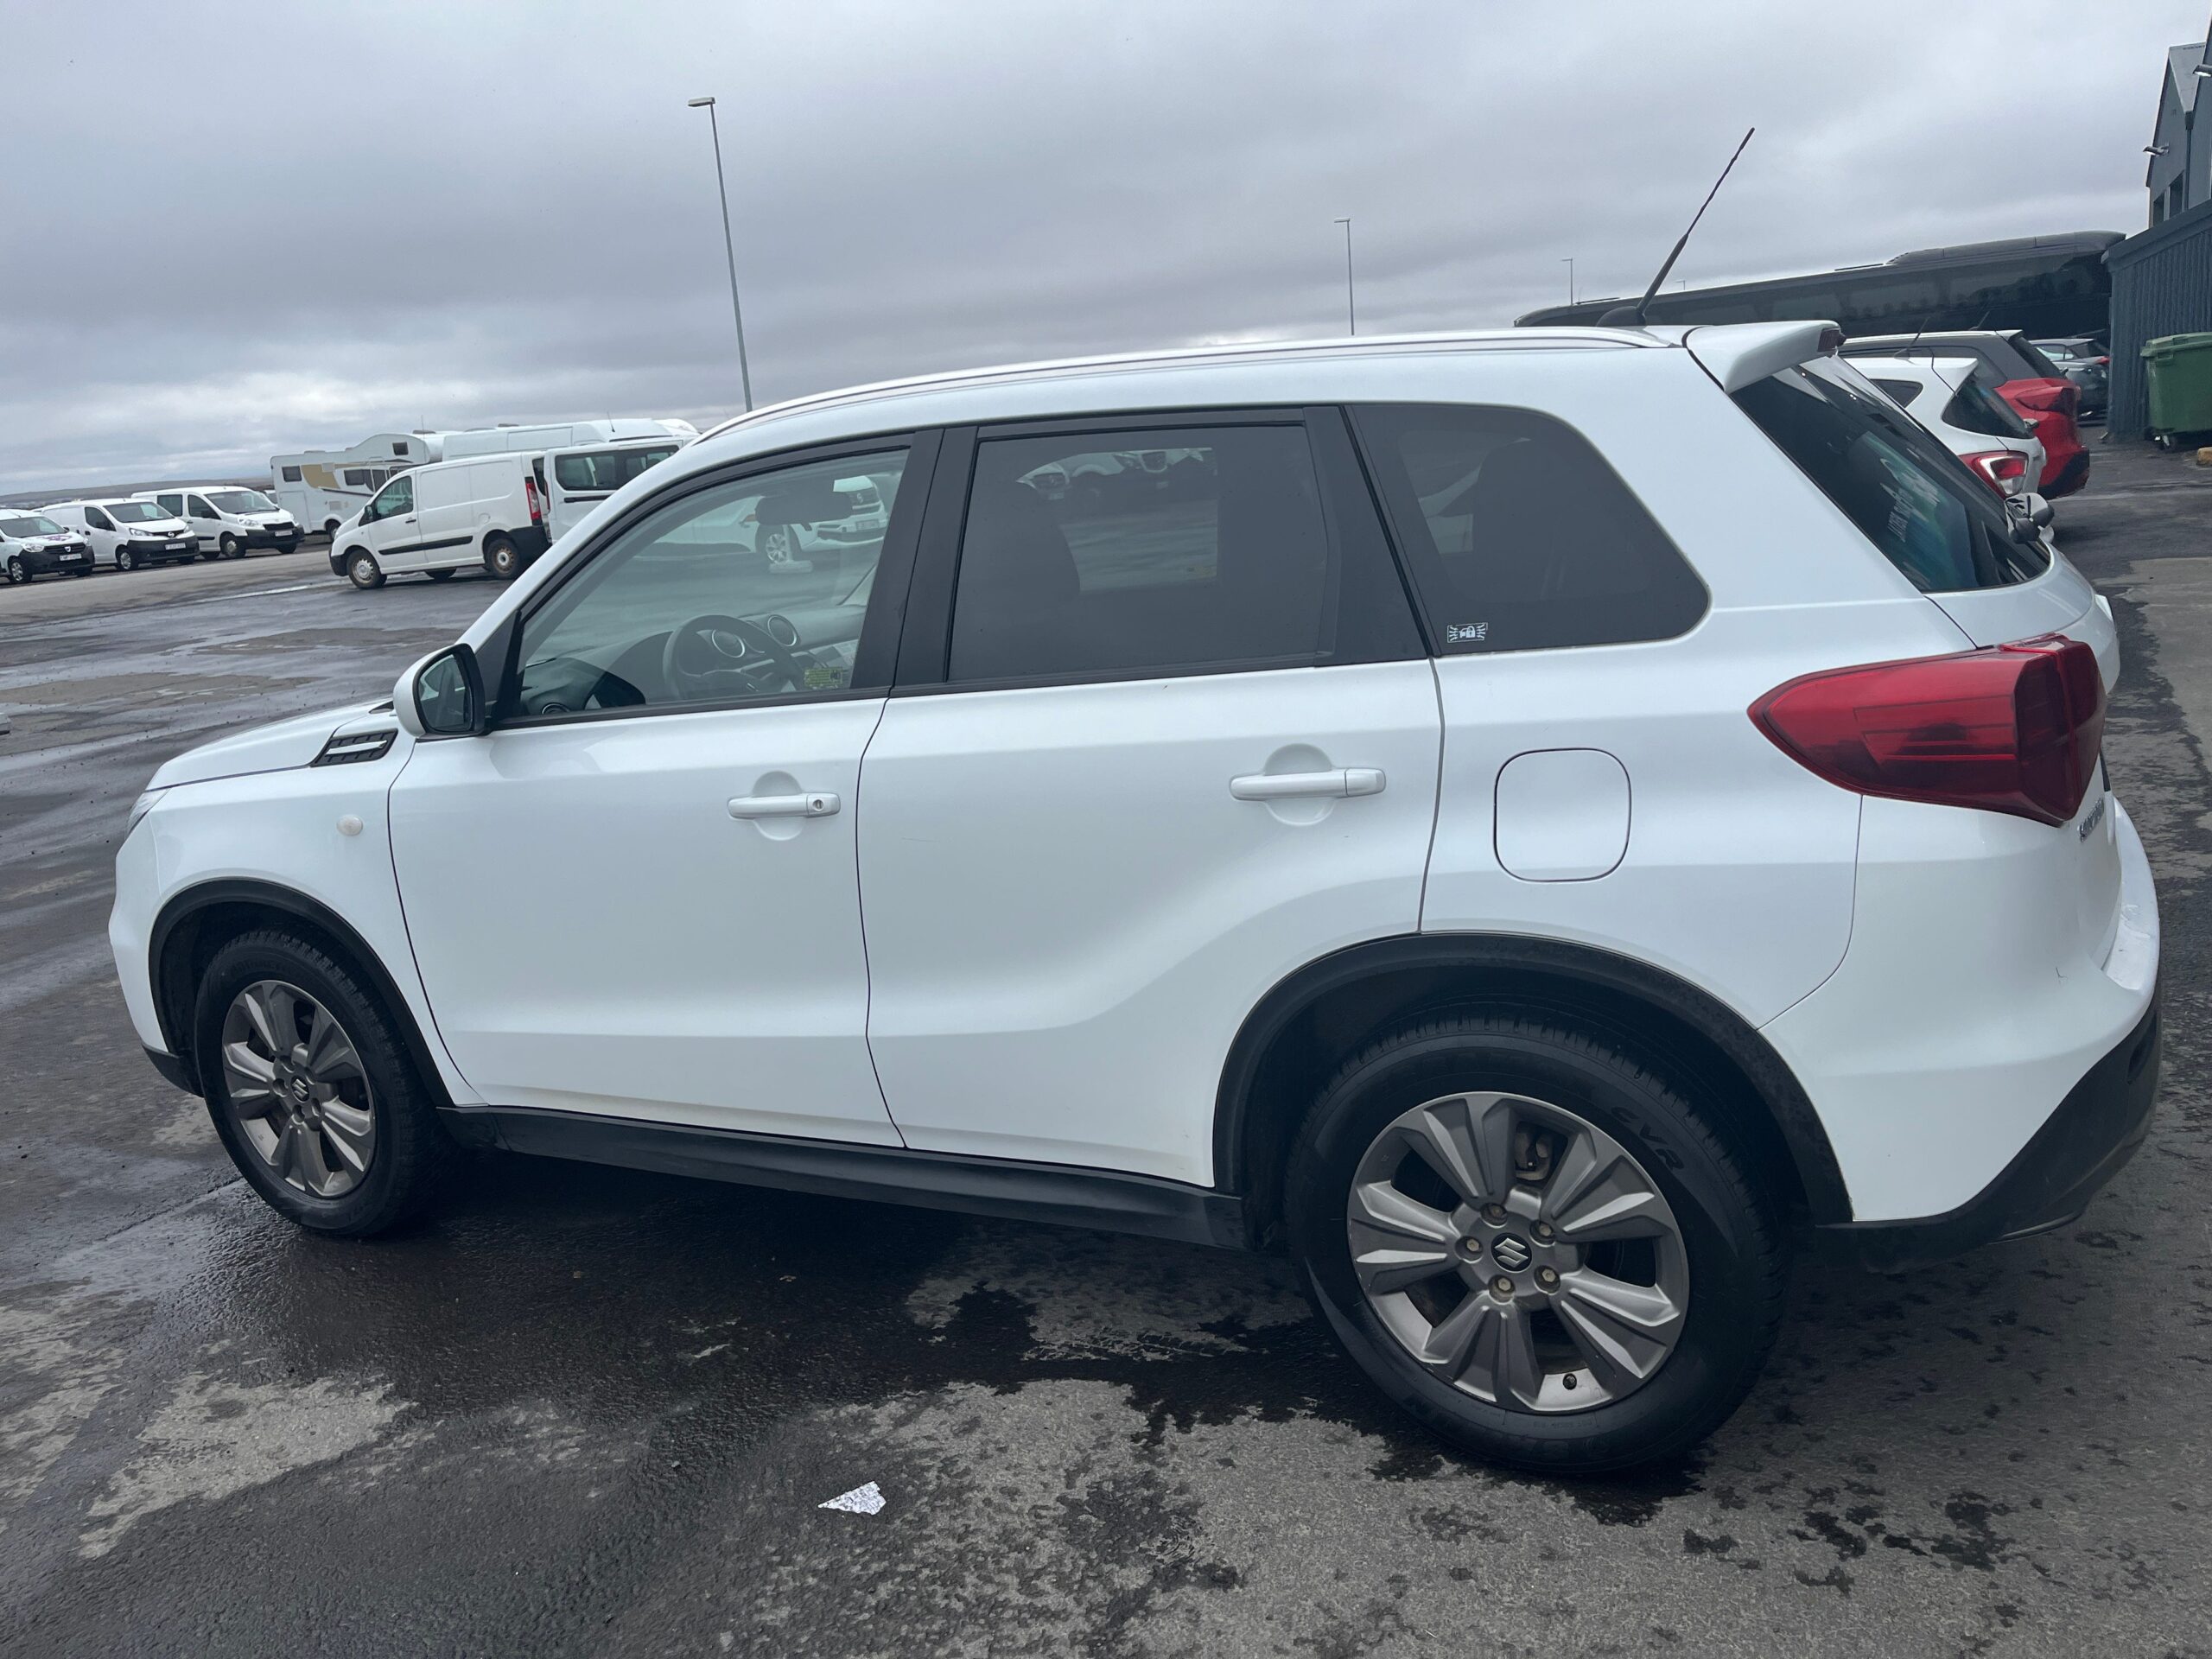 A white SUV in Iceland.